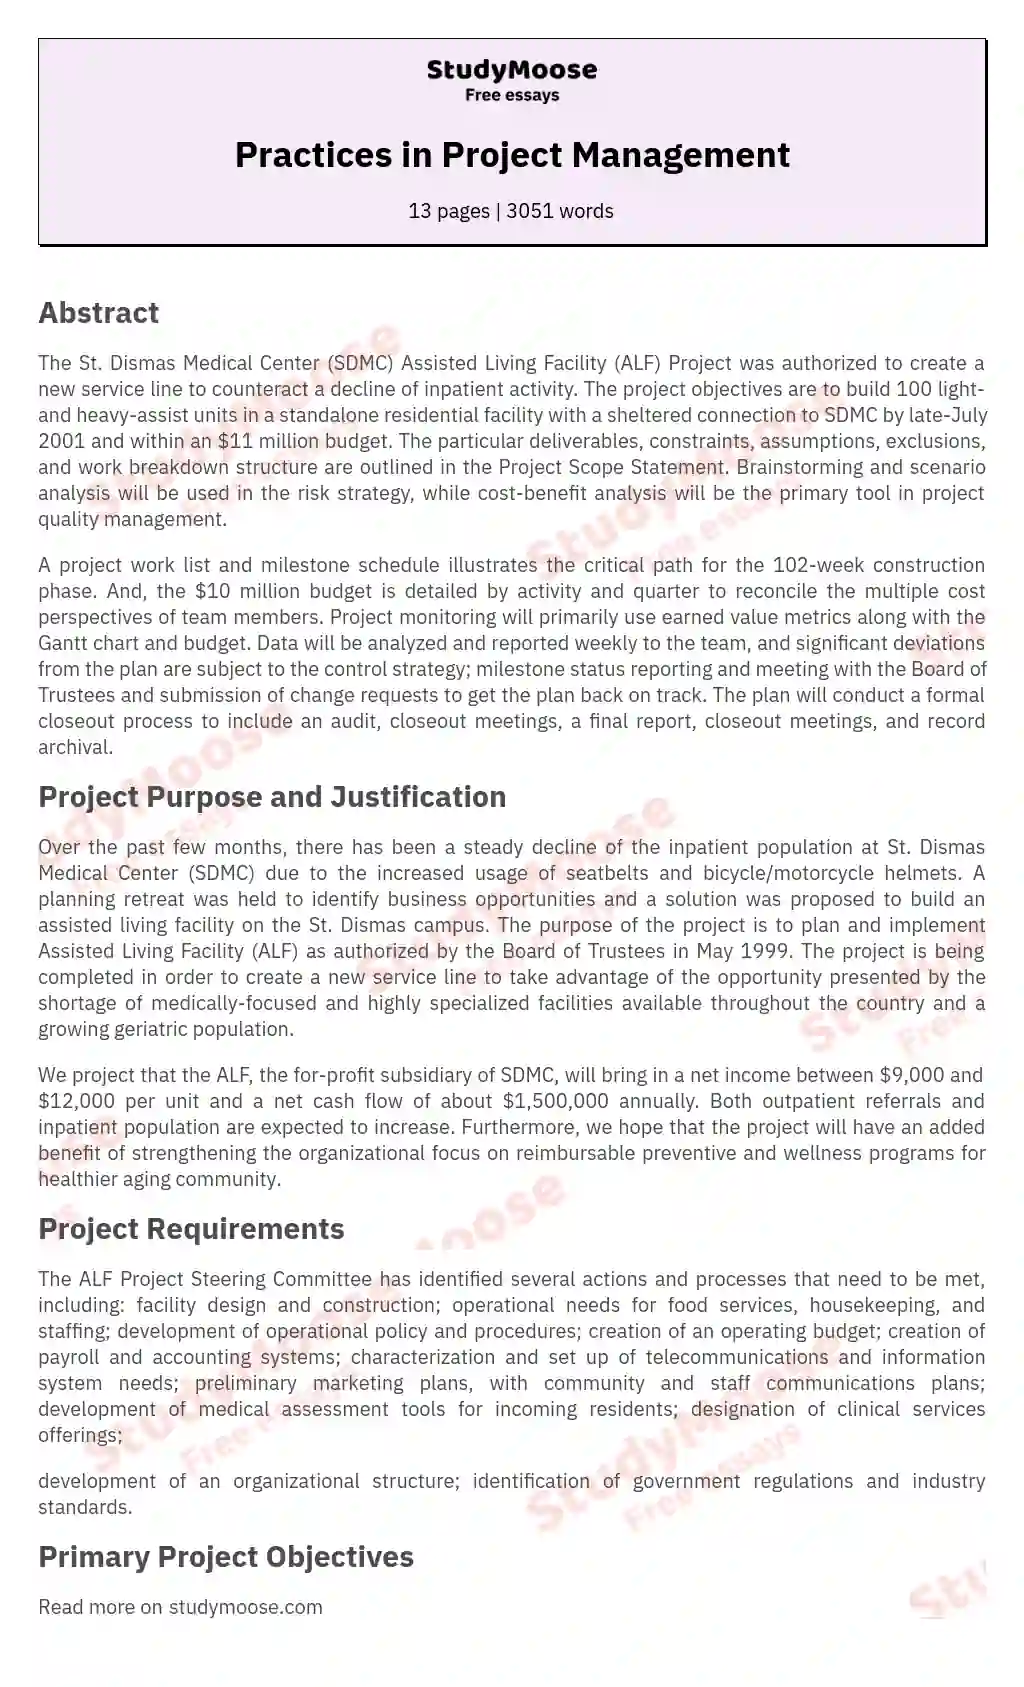 Practices in Project Management essay